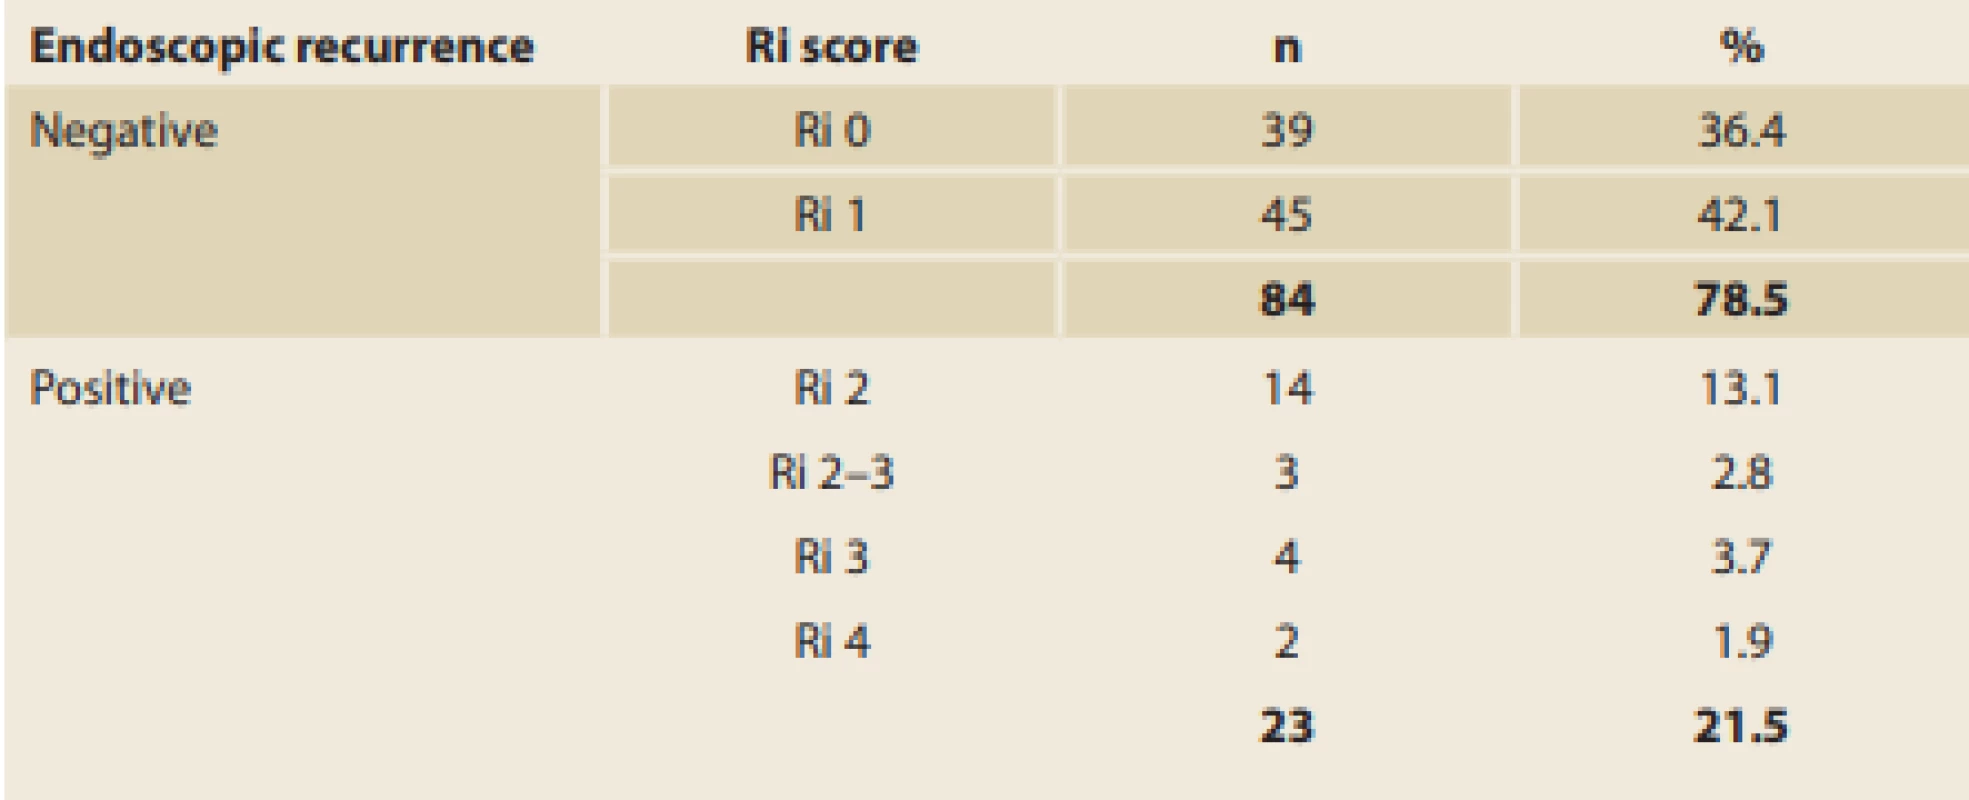 Assessment of EPER using Rutgeerts score (Ri) 6 months after ICR.